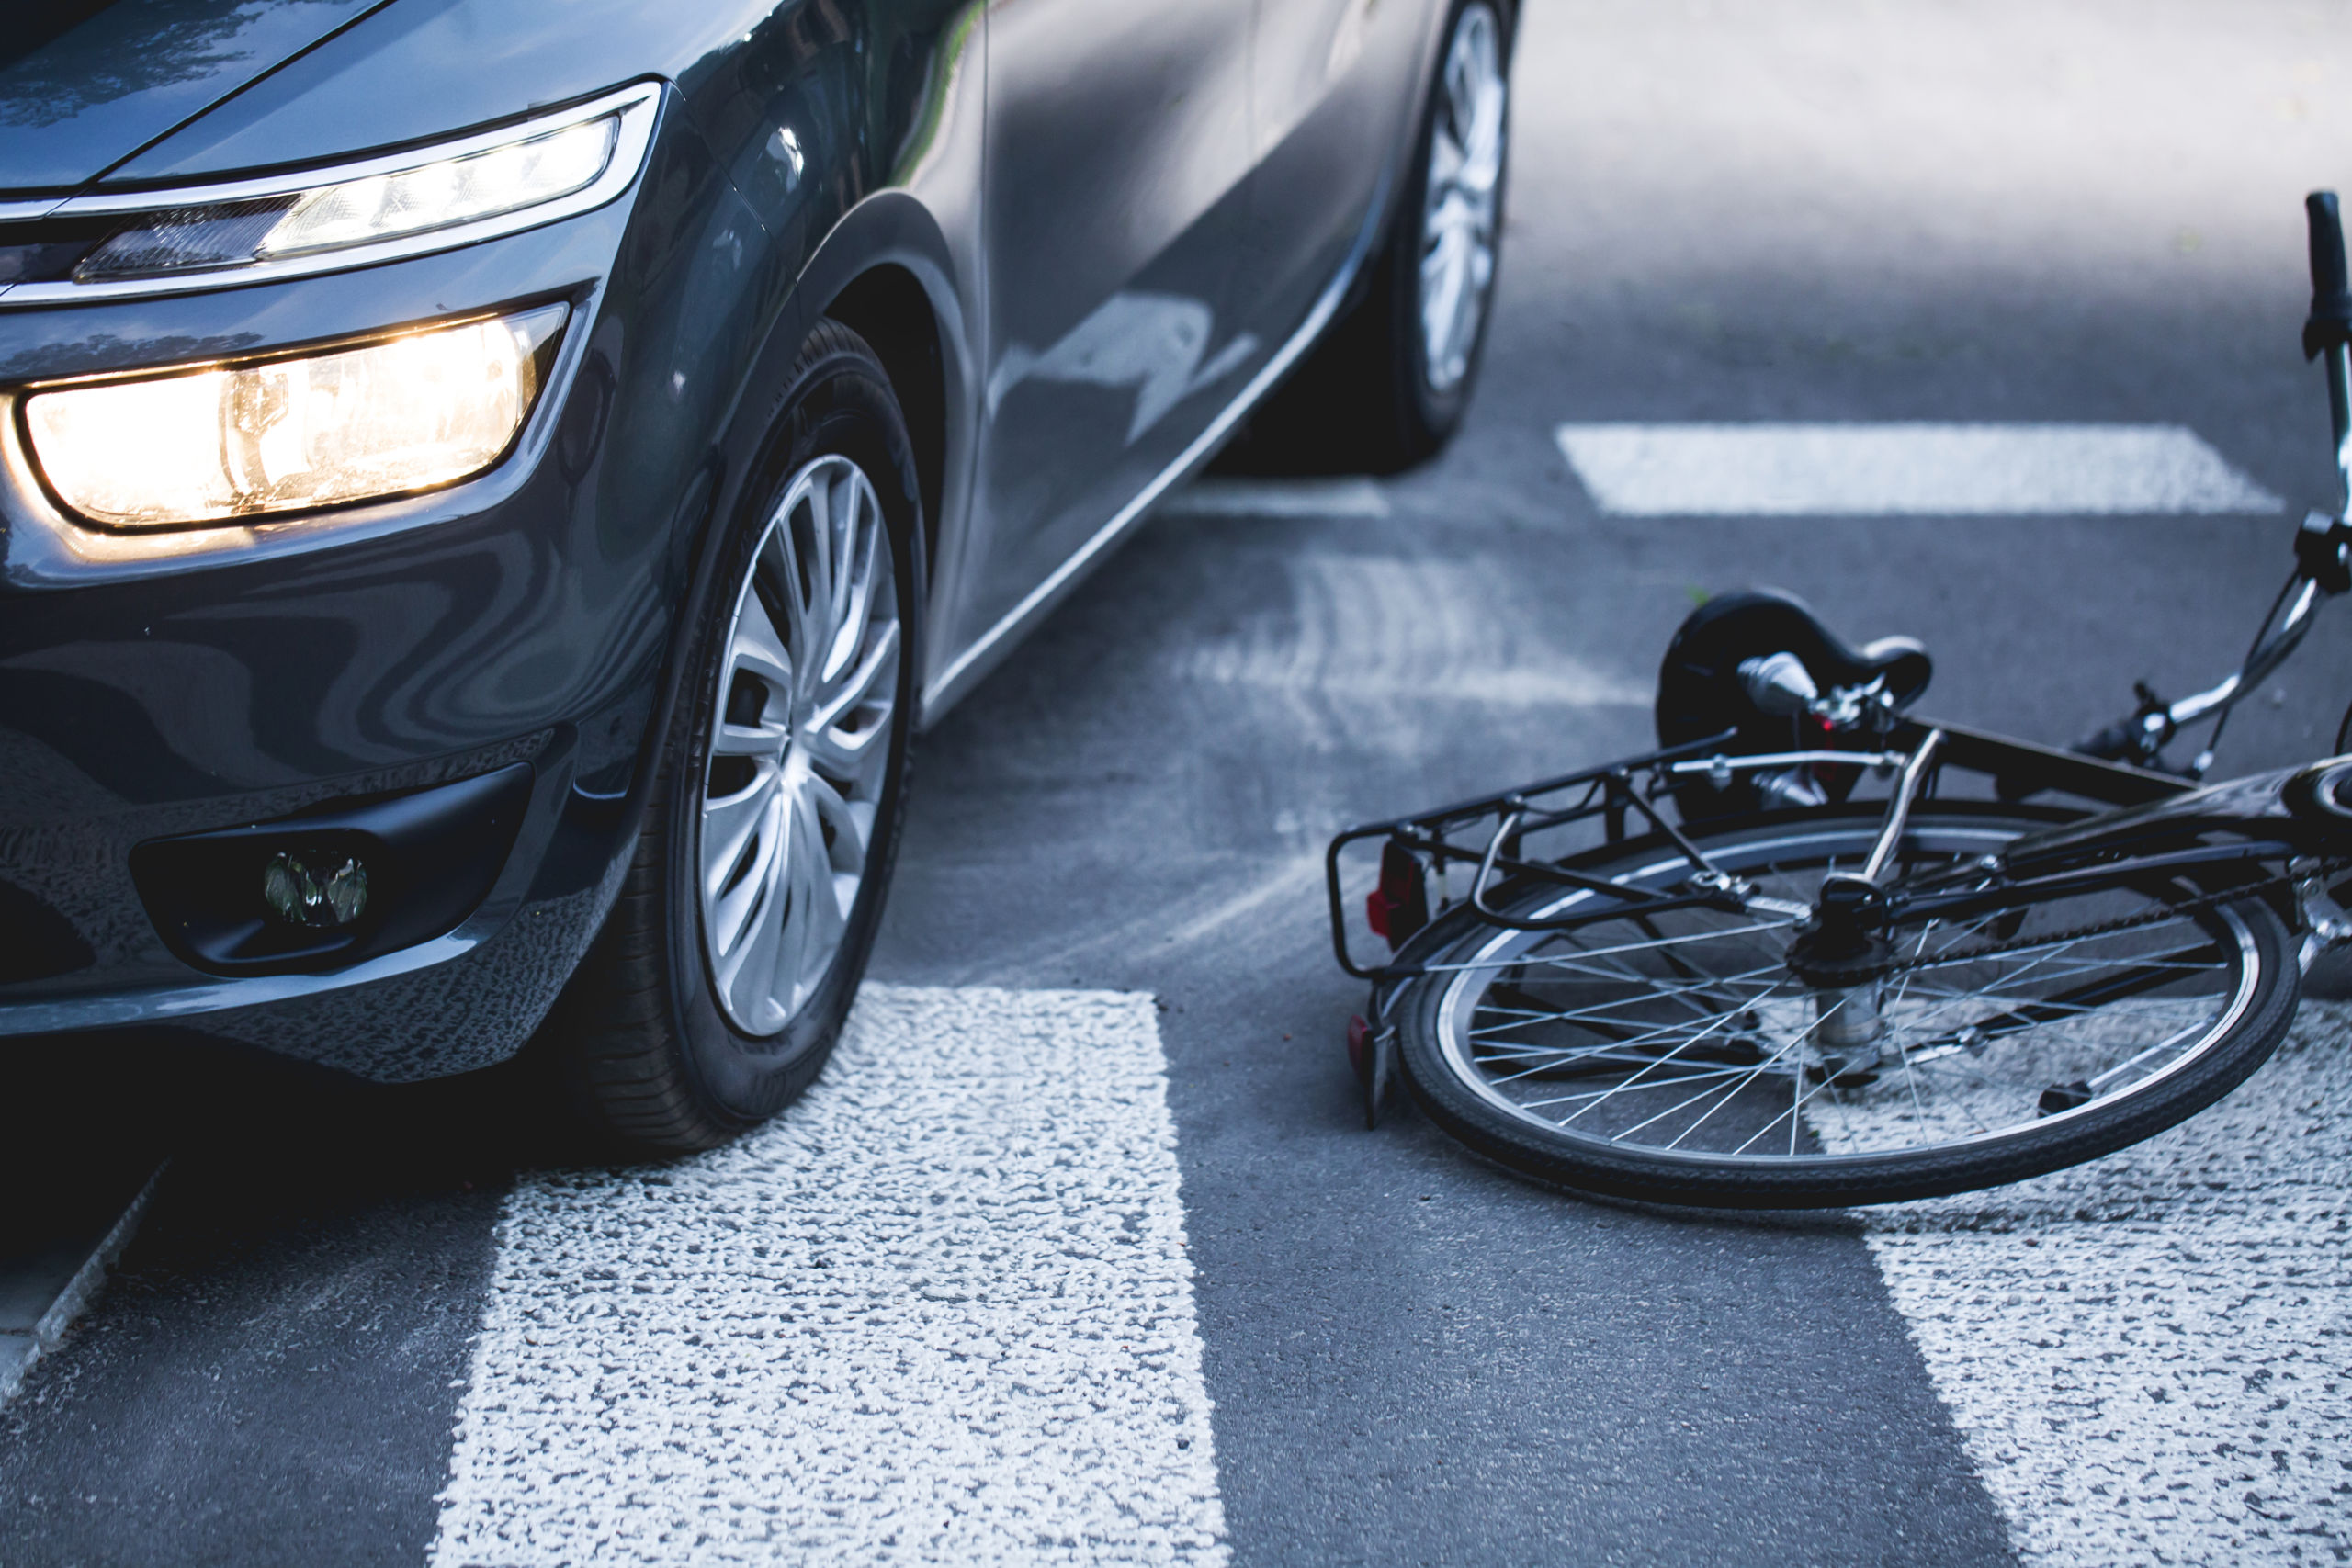 Call the Deerfield Beach Bicycle Accident Lawyers at Fuentes Berrio Schutt 24/7 at (954) 752-1110 for your free case review." "Our Bicycle Accident Law Firm in Deerfield Beach, Florida, offers you a free case review 24/7 at (954) 752-1110.